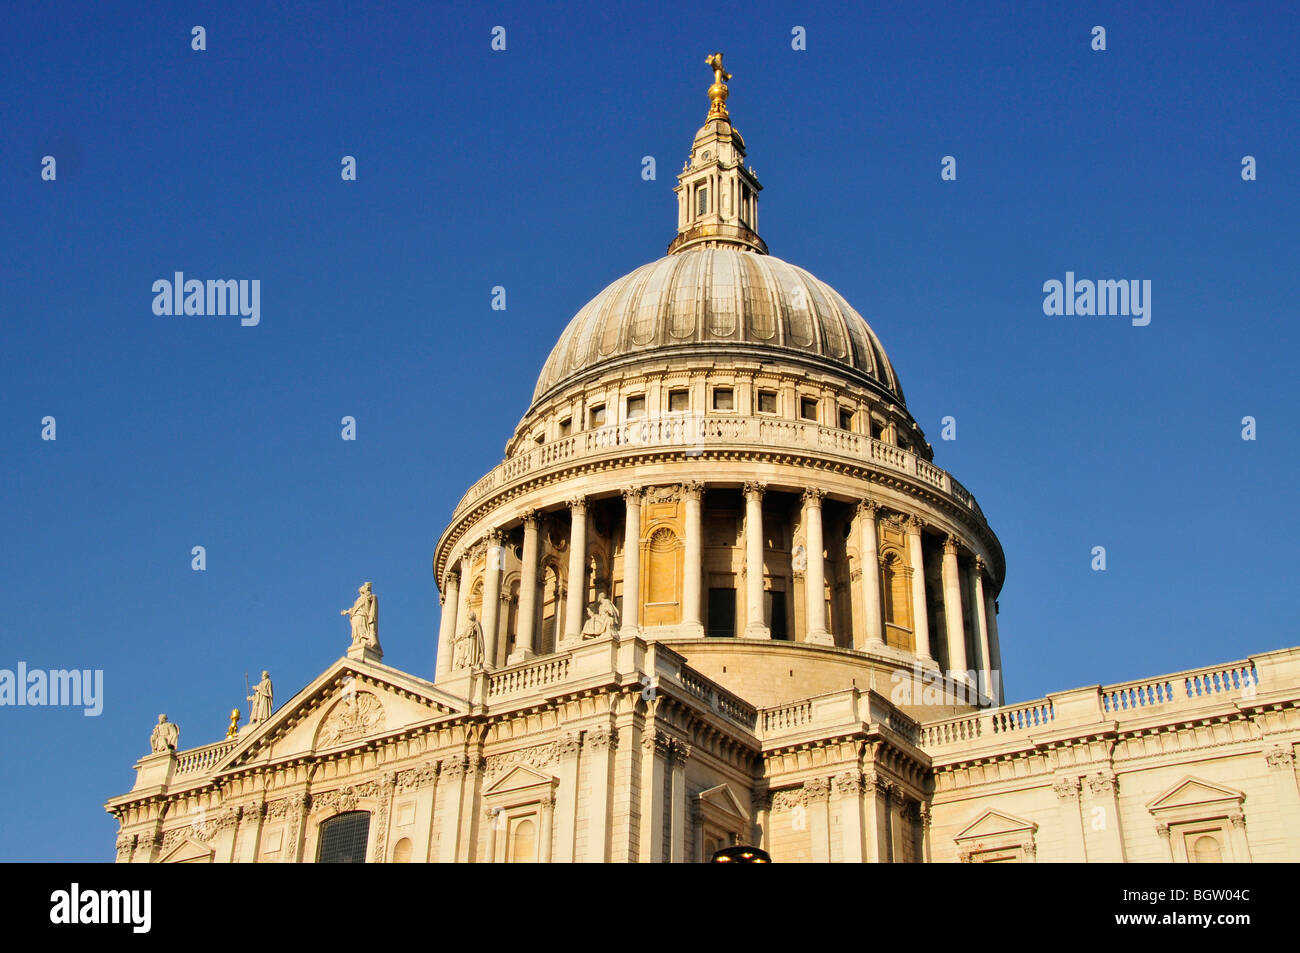 Dome of St. Paul's Cathedral, London, England, United Kingdom, Europe Stock Photo